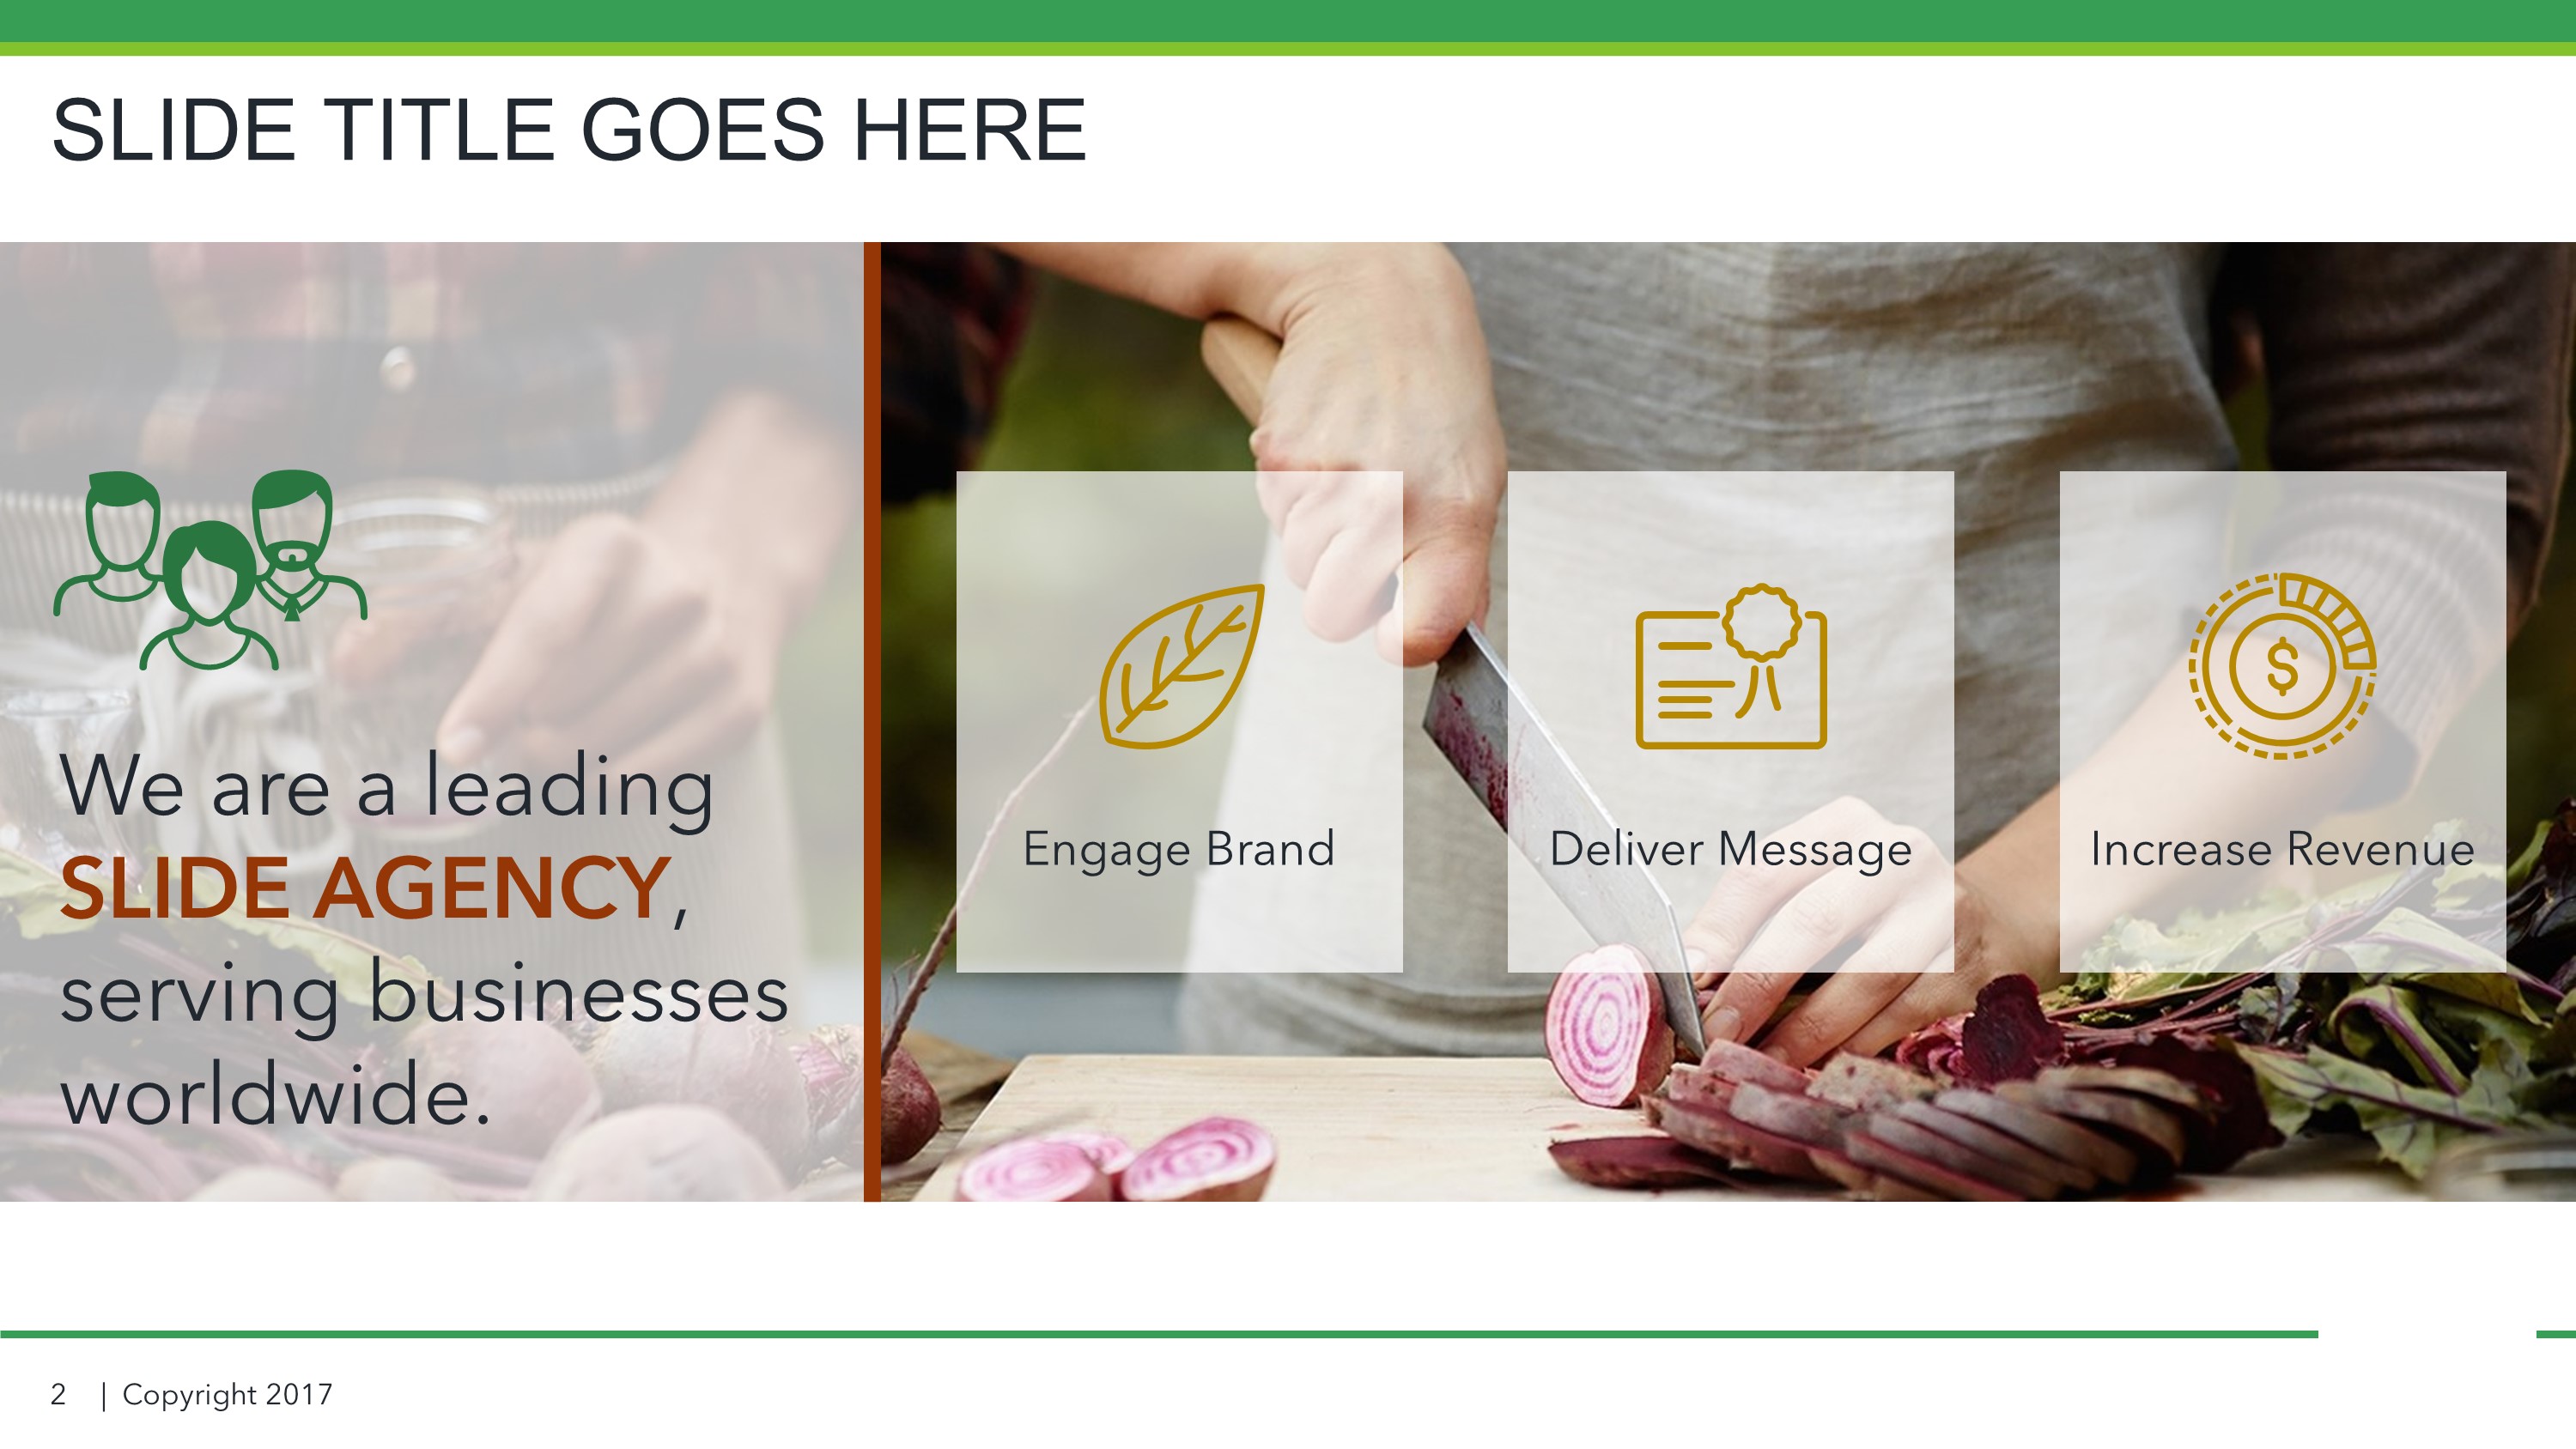 Food Industry About Us Slides for PowerPoint